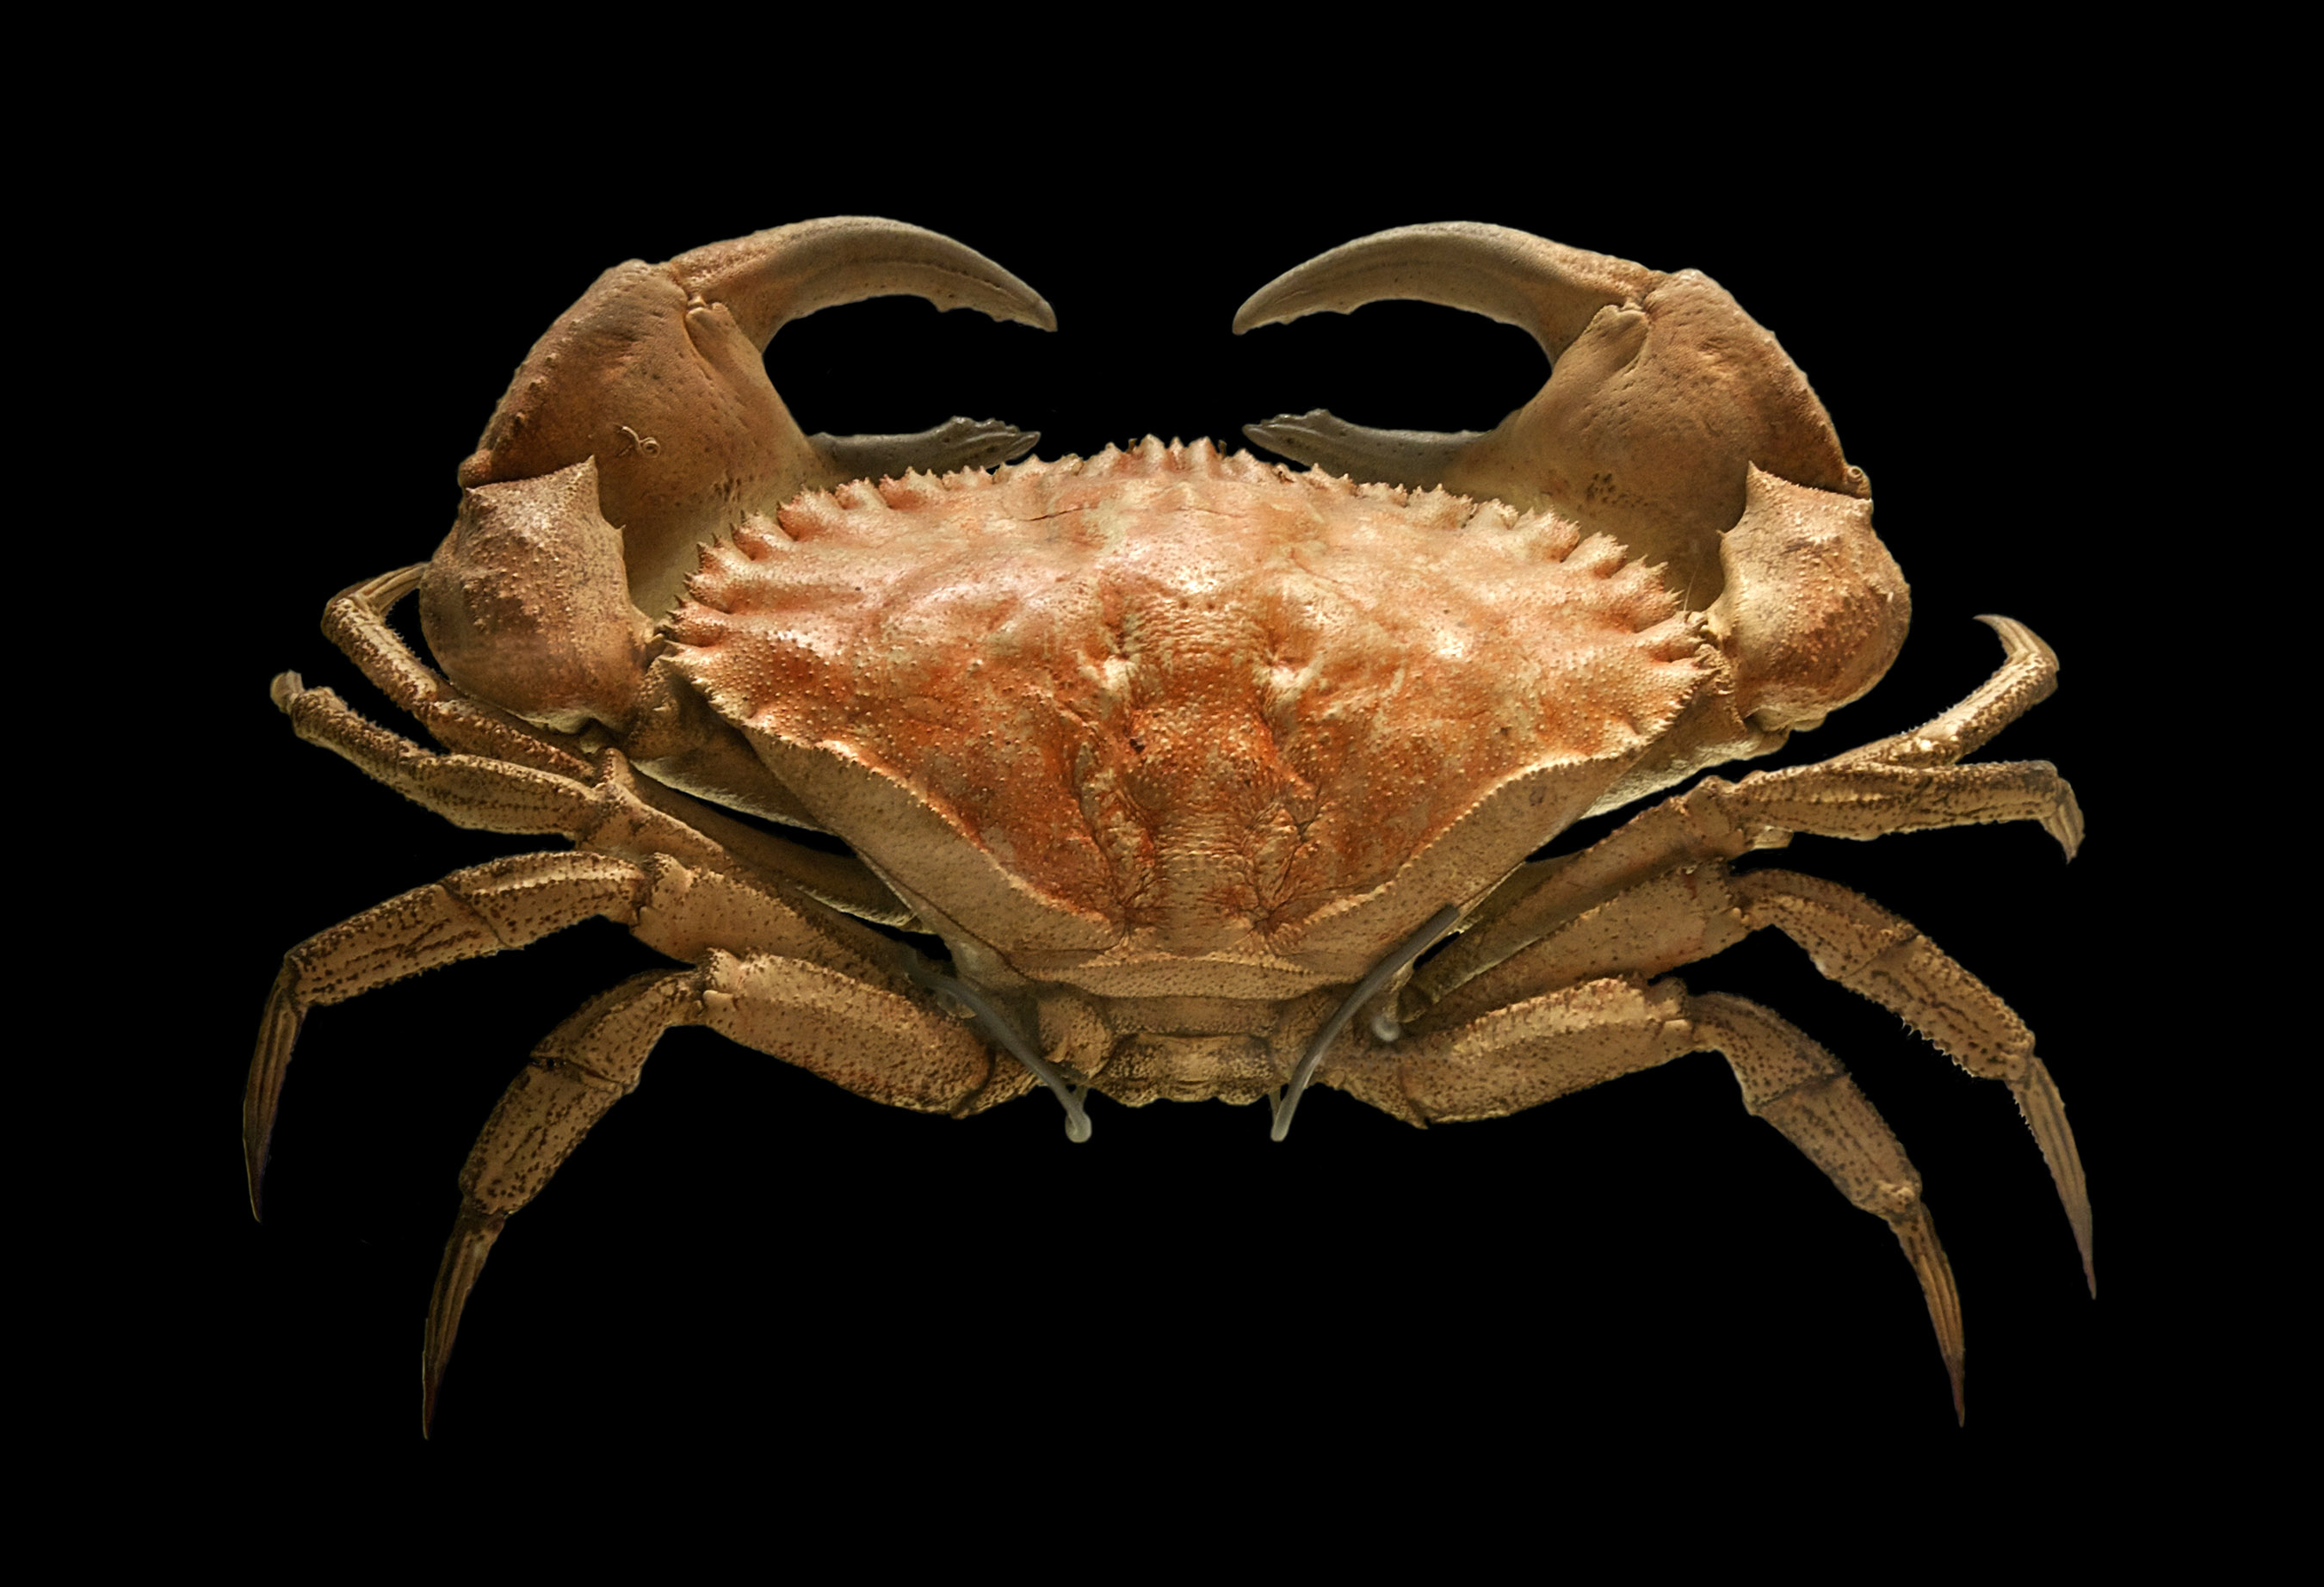 Toothed rock crab - Cancer bellianus image - Free stock photo ...